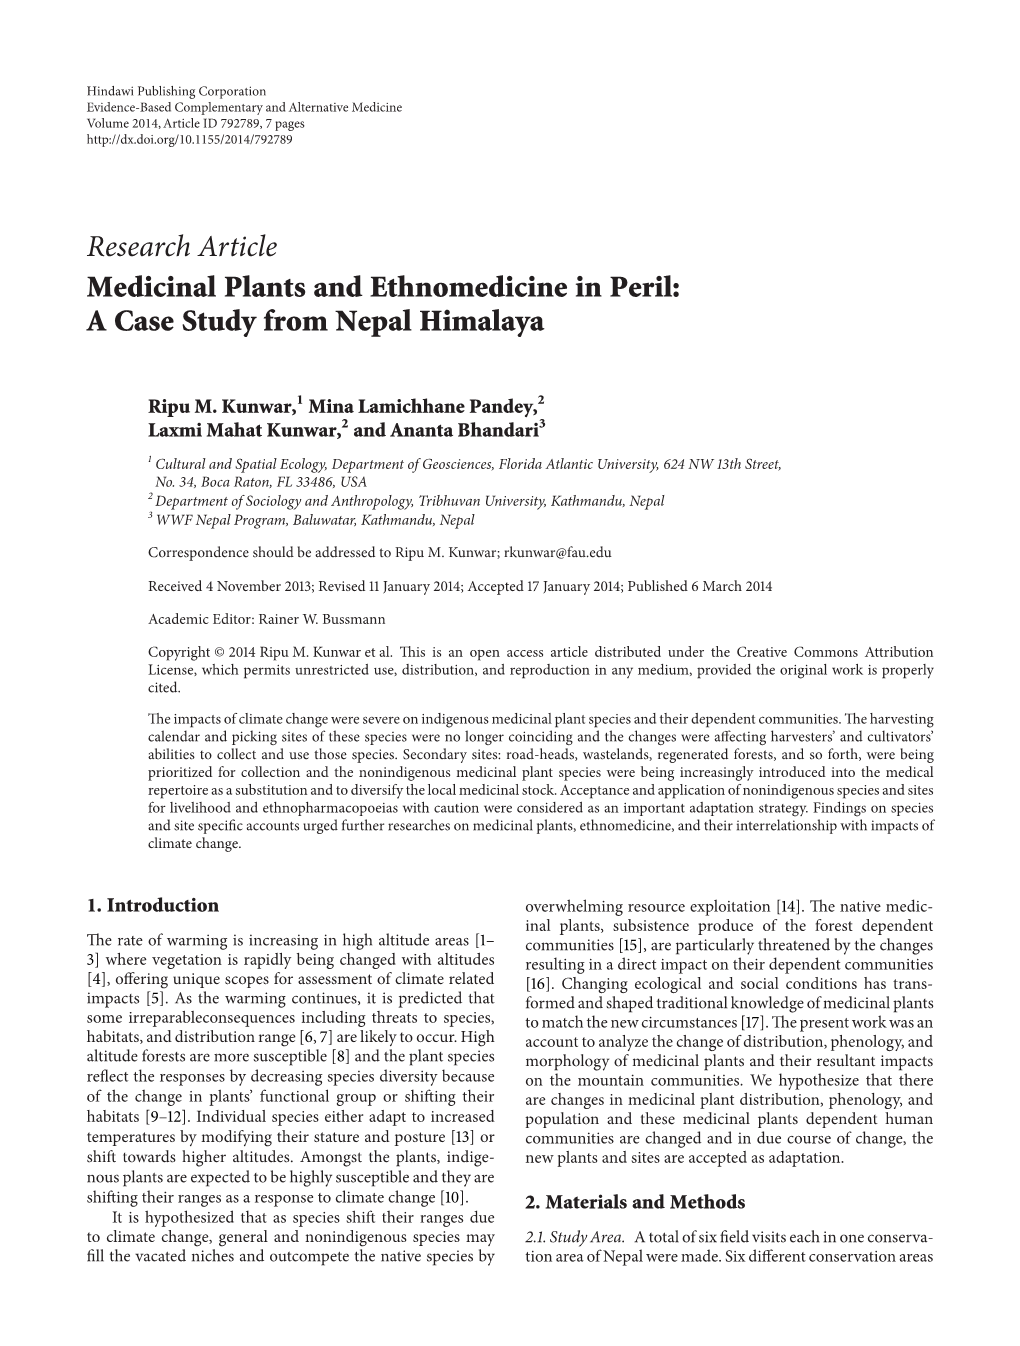 Research Article Medicinal Plants and Ethnomedicine in Peril: a Case Study from Nepal Himalaya